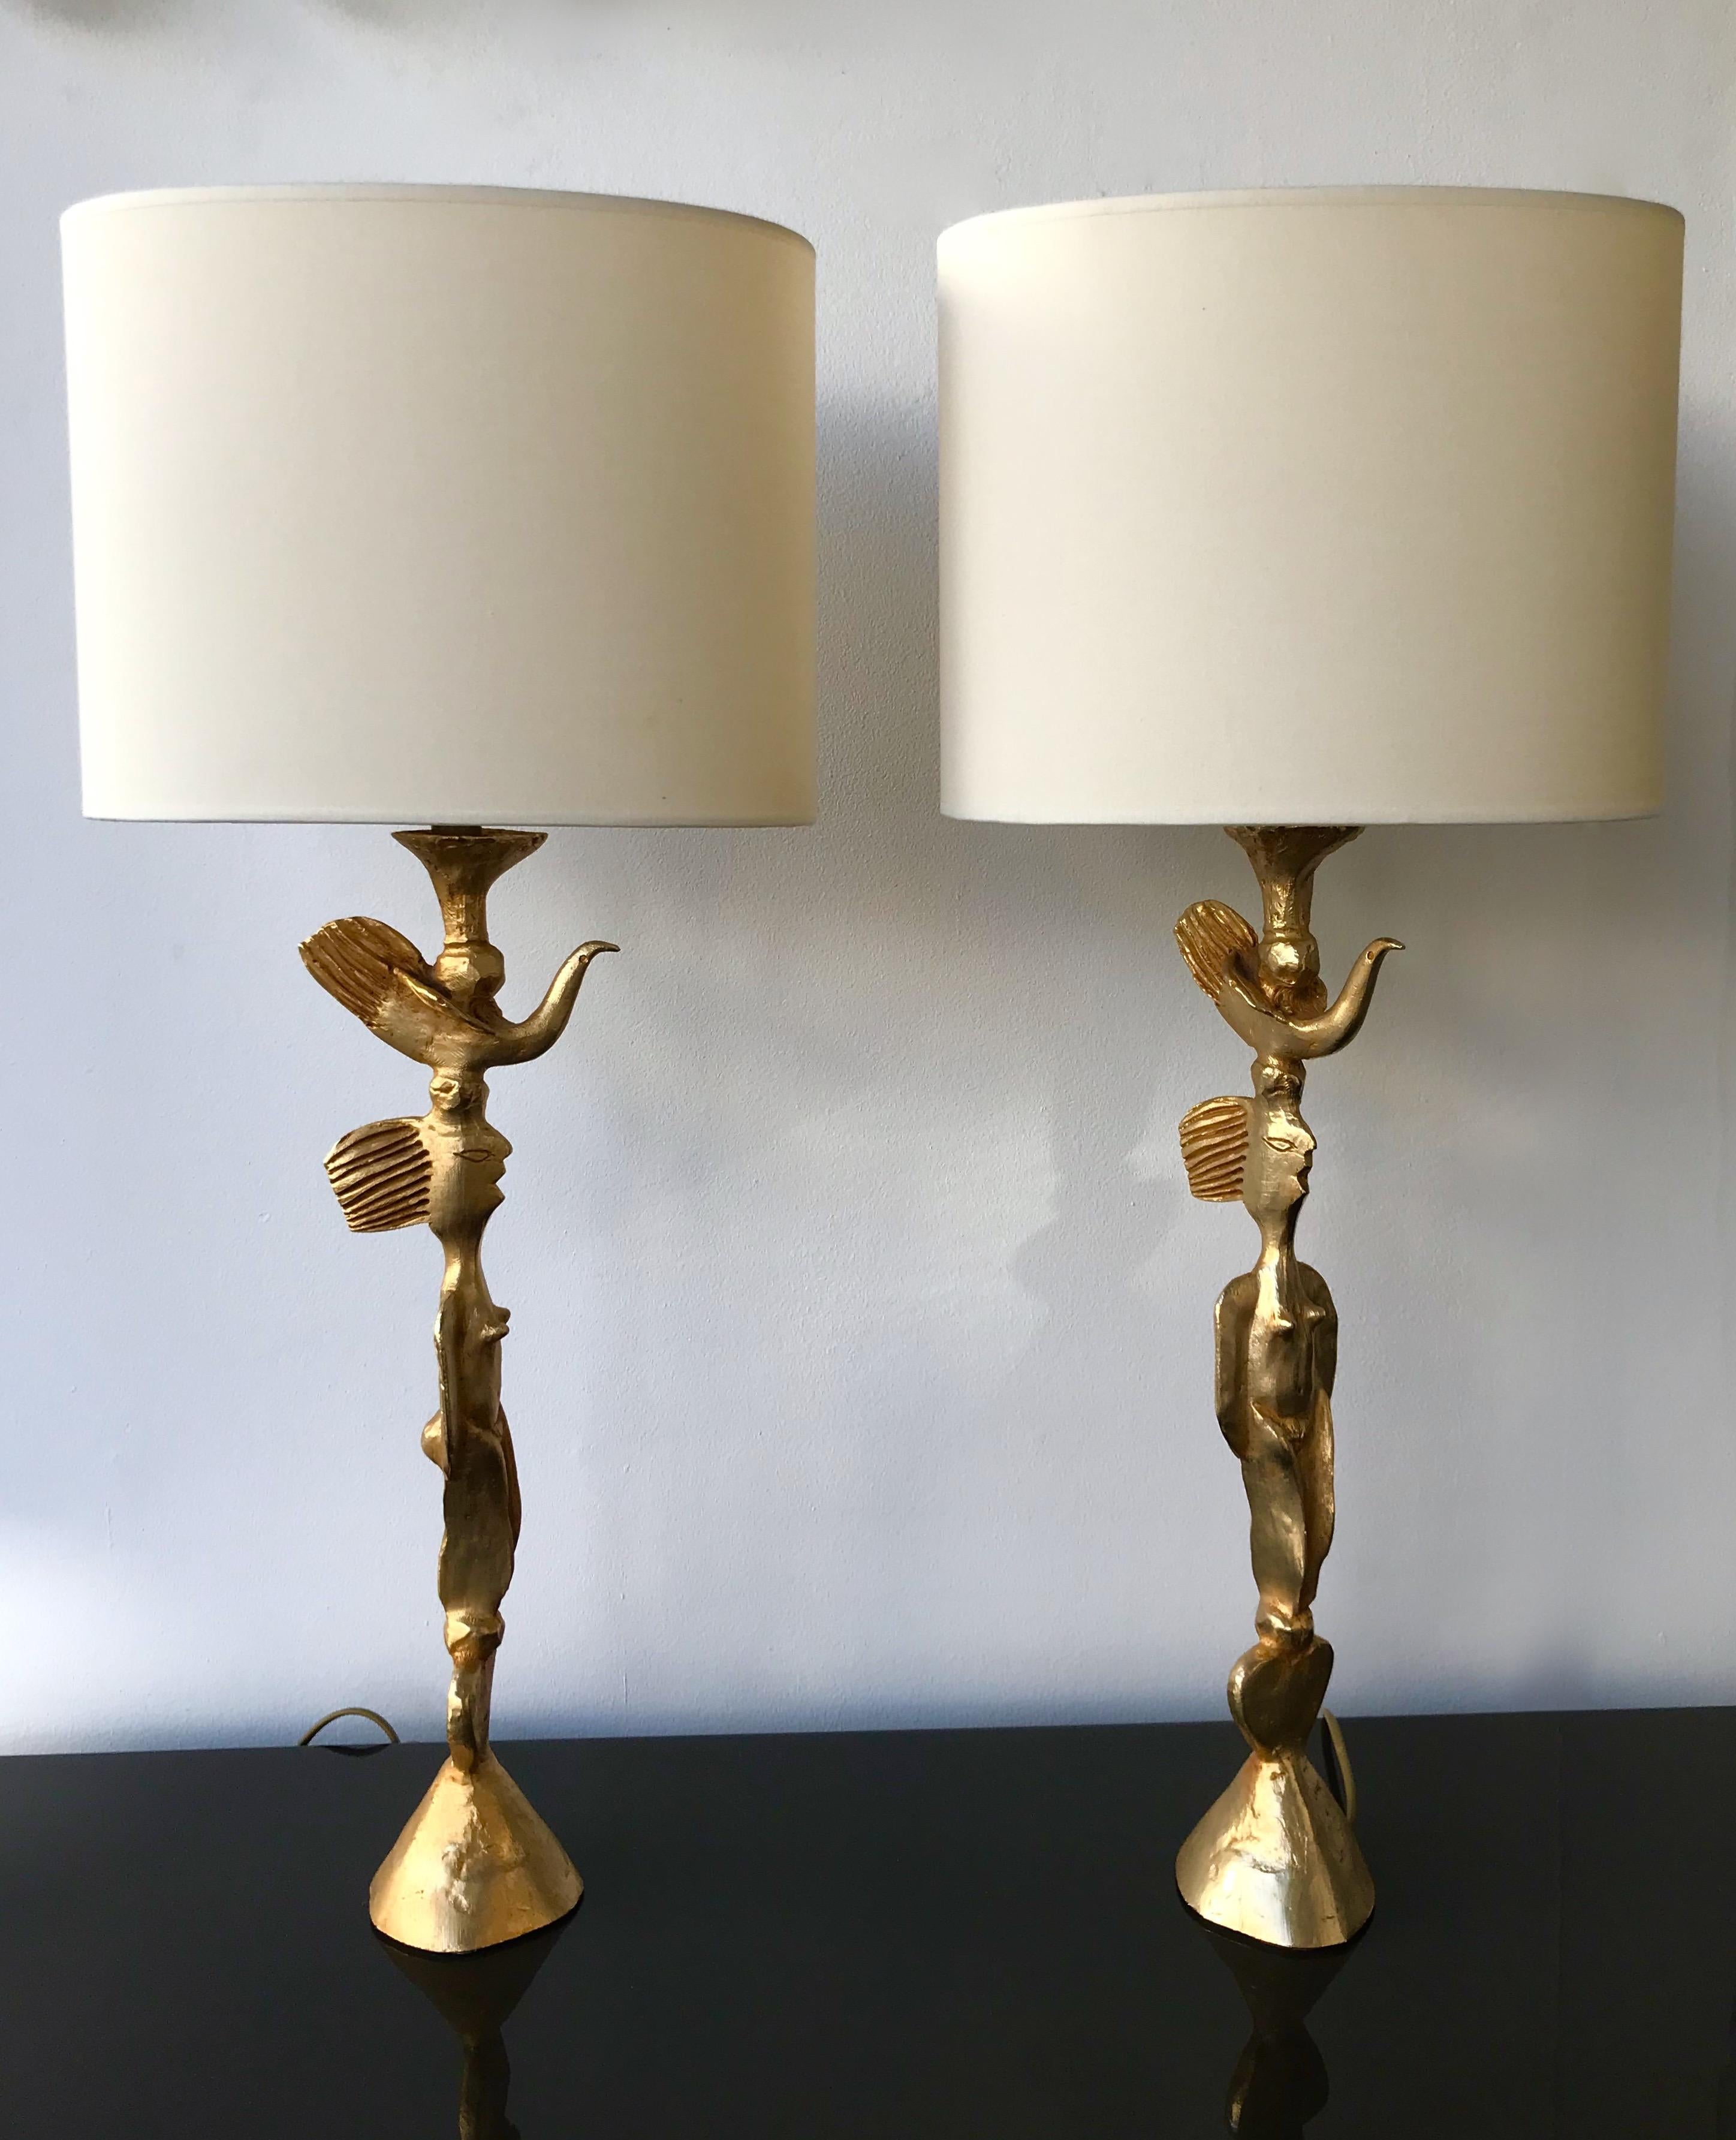 Metal Pair of Gilt Bronze Lamps by Pierre Casenove for Fondica, France, 1980s